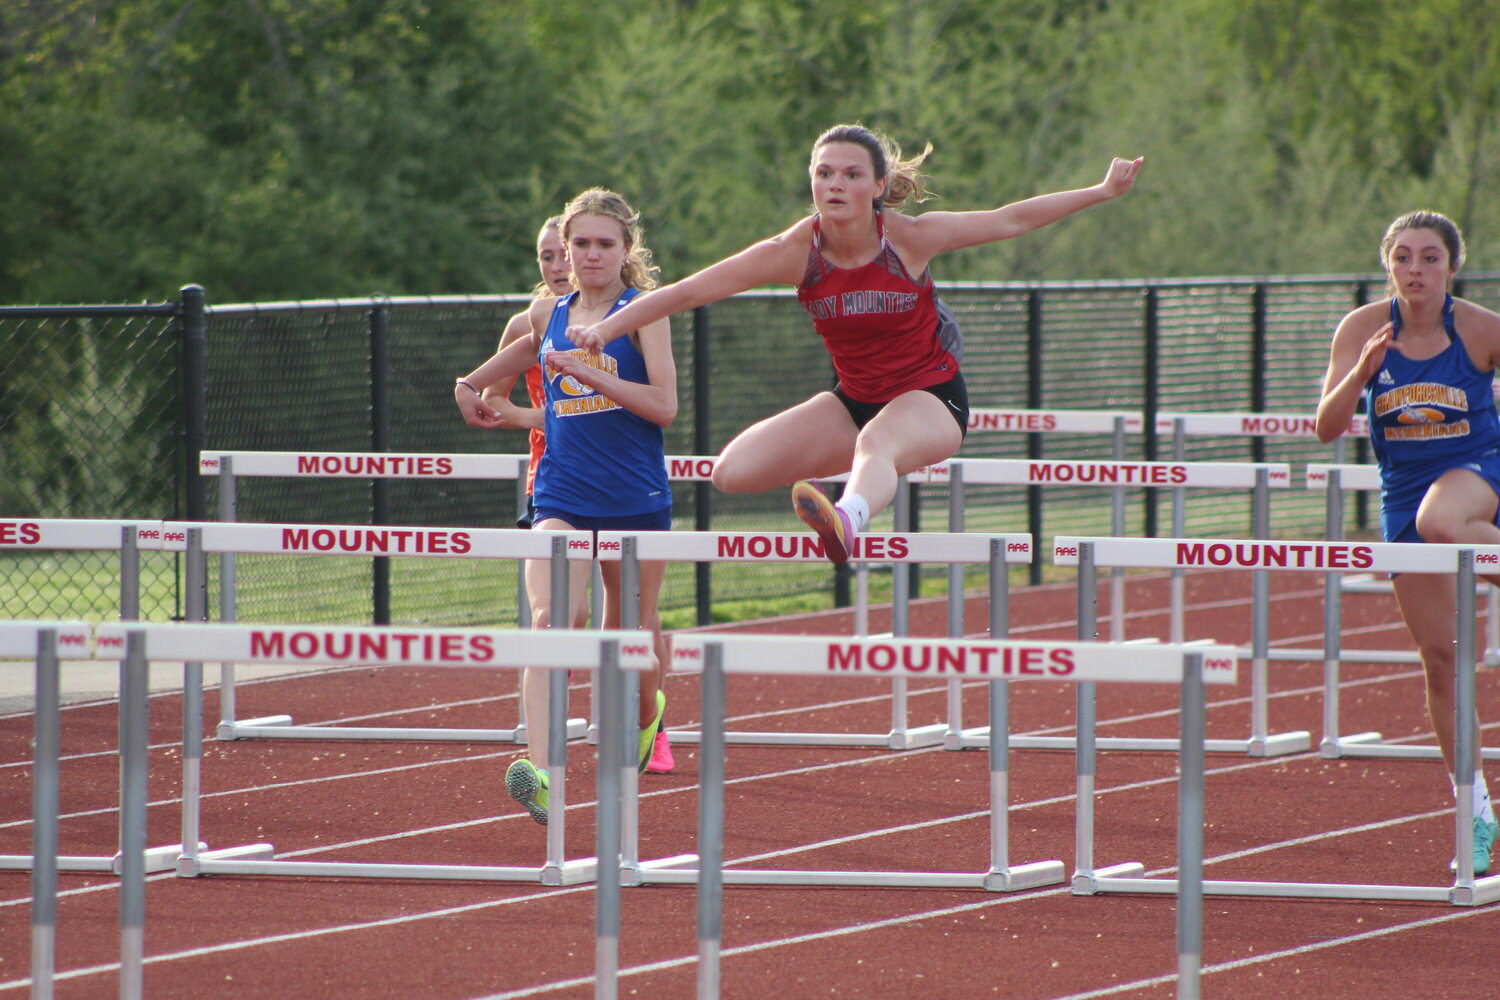 Southmont's Saylor Woods earned a county title in the girls 100 meter hurdles.